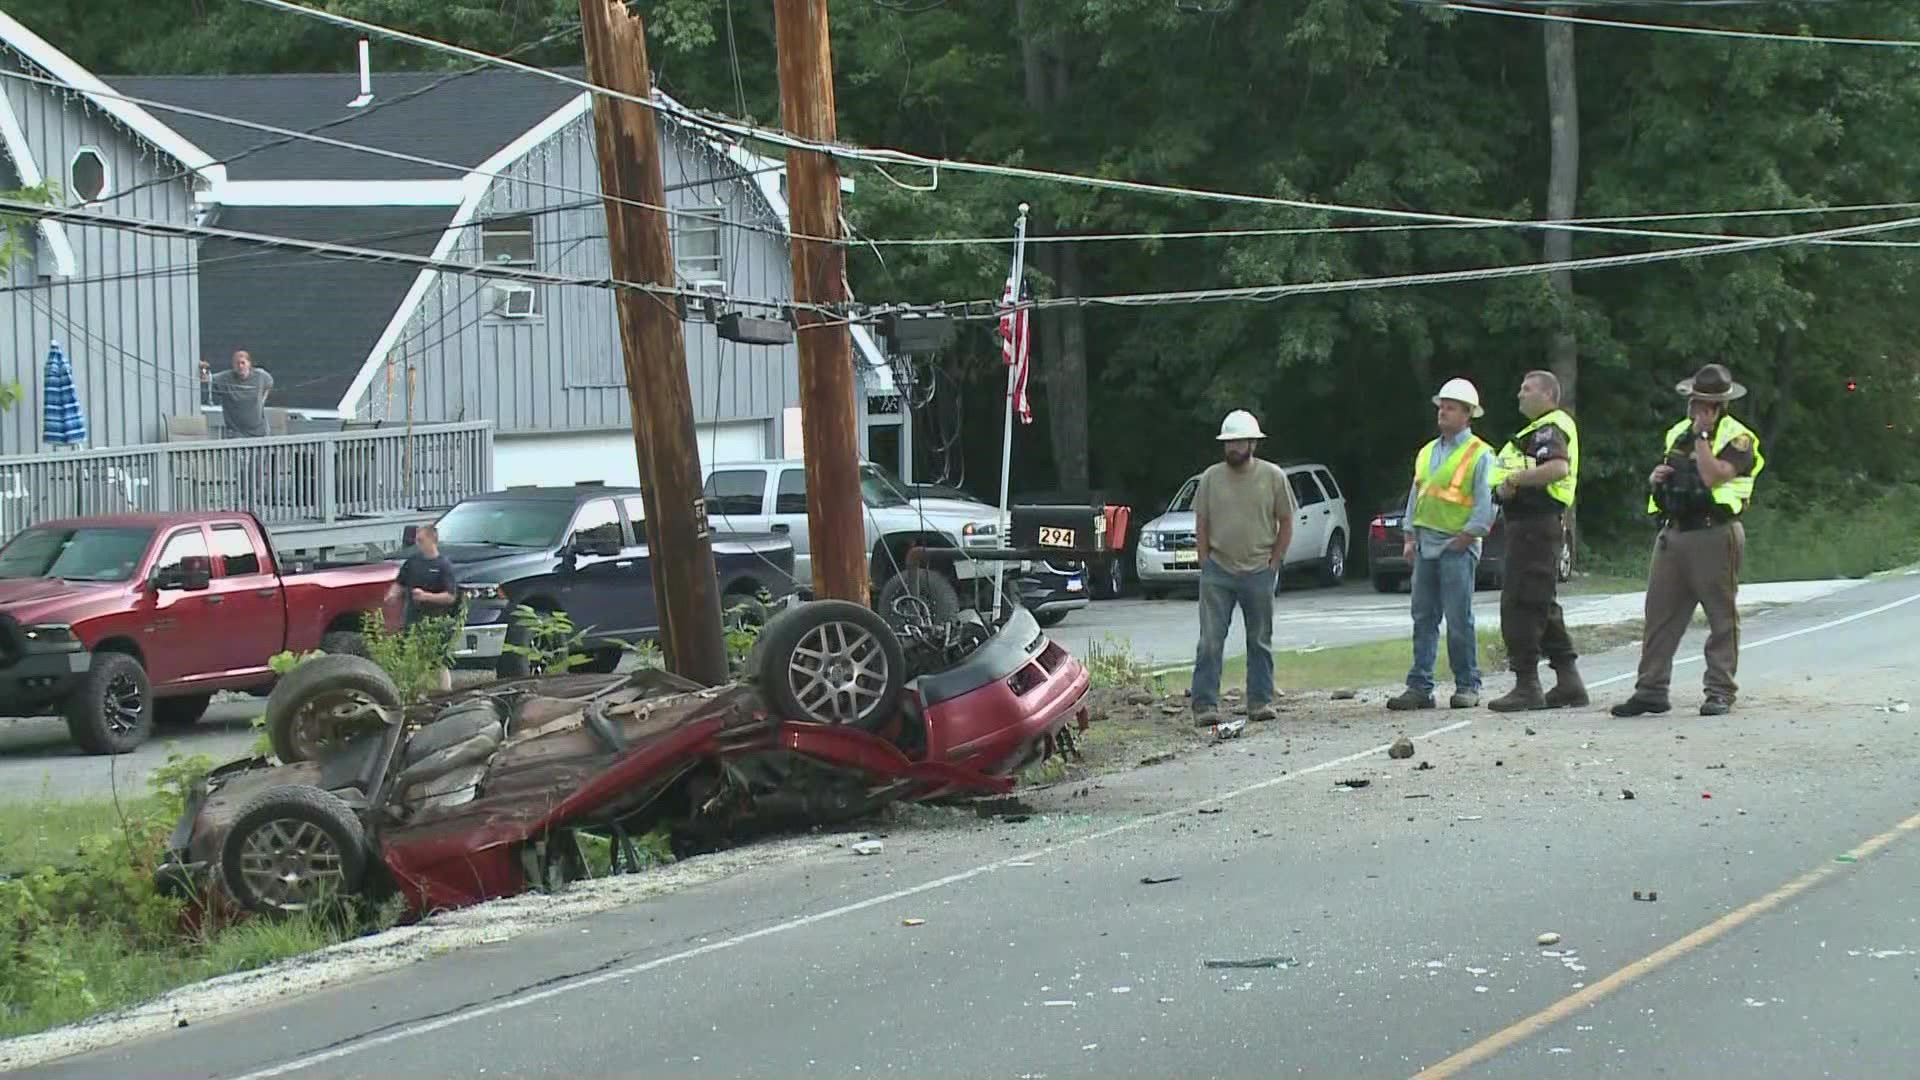 Two people were injured after a crash in Raymond early Tuesday morning. It happened around 2 a.m. on Webbs Mills Road.